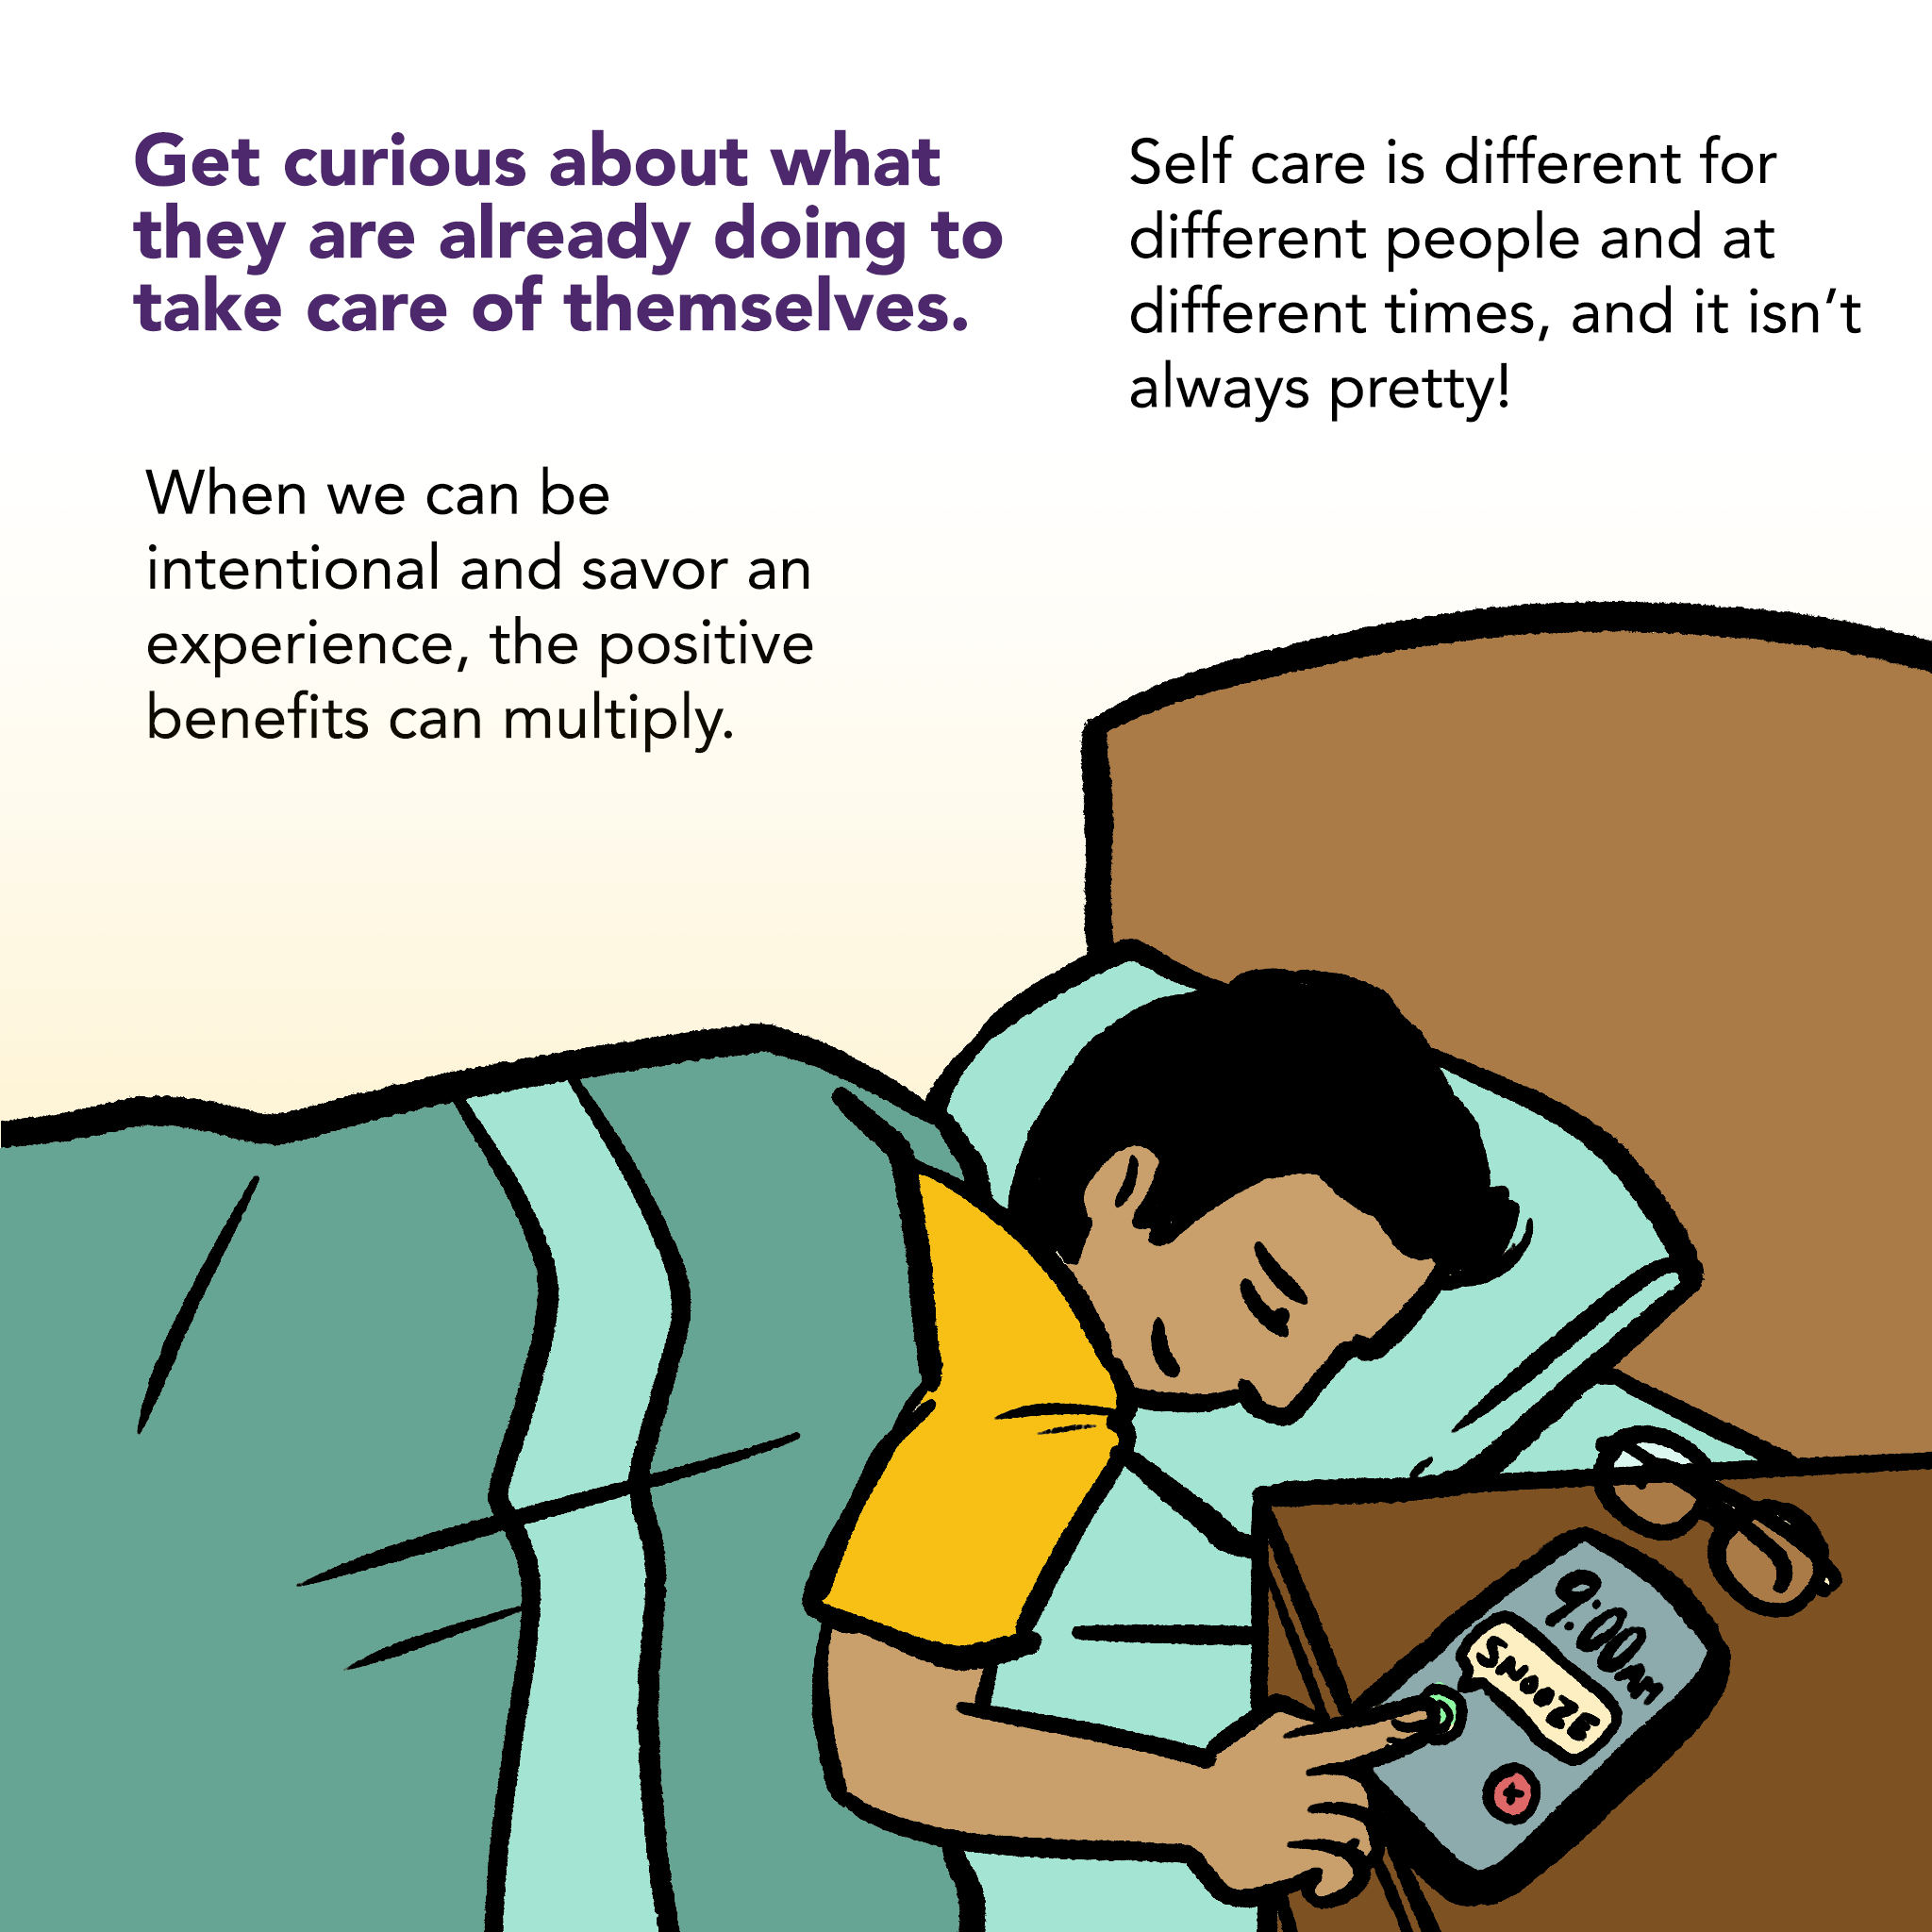 Image of a young person in bed, eyes closed and a smile on their face, pressing "snooze" on their smartphone alarm. Text says "Get curious about what they are already doing to take care of themselves. Self care is different for different people and at different times, and it isn't always pretty! When we can be intentional and savor an experience, the positive benefits can multiply.